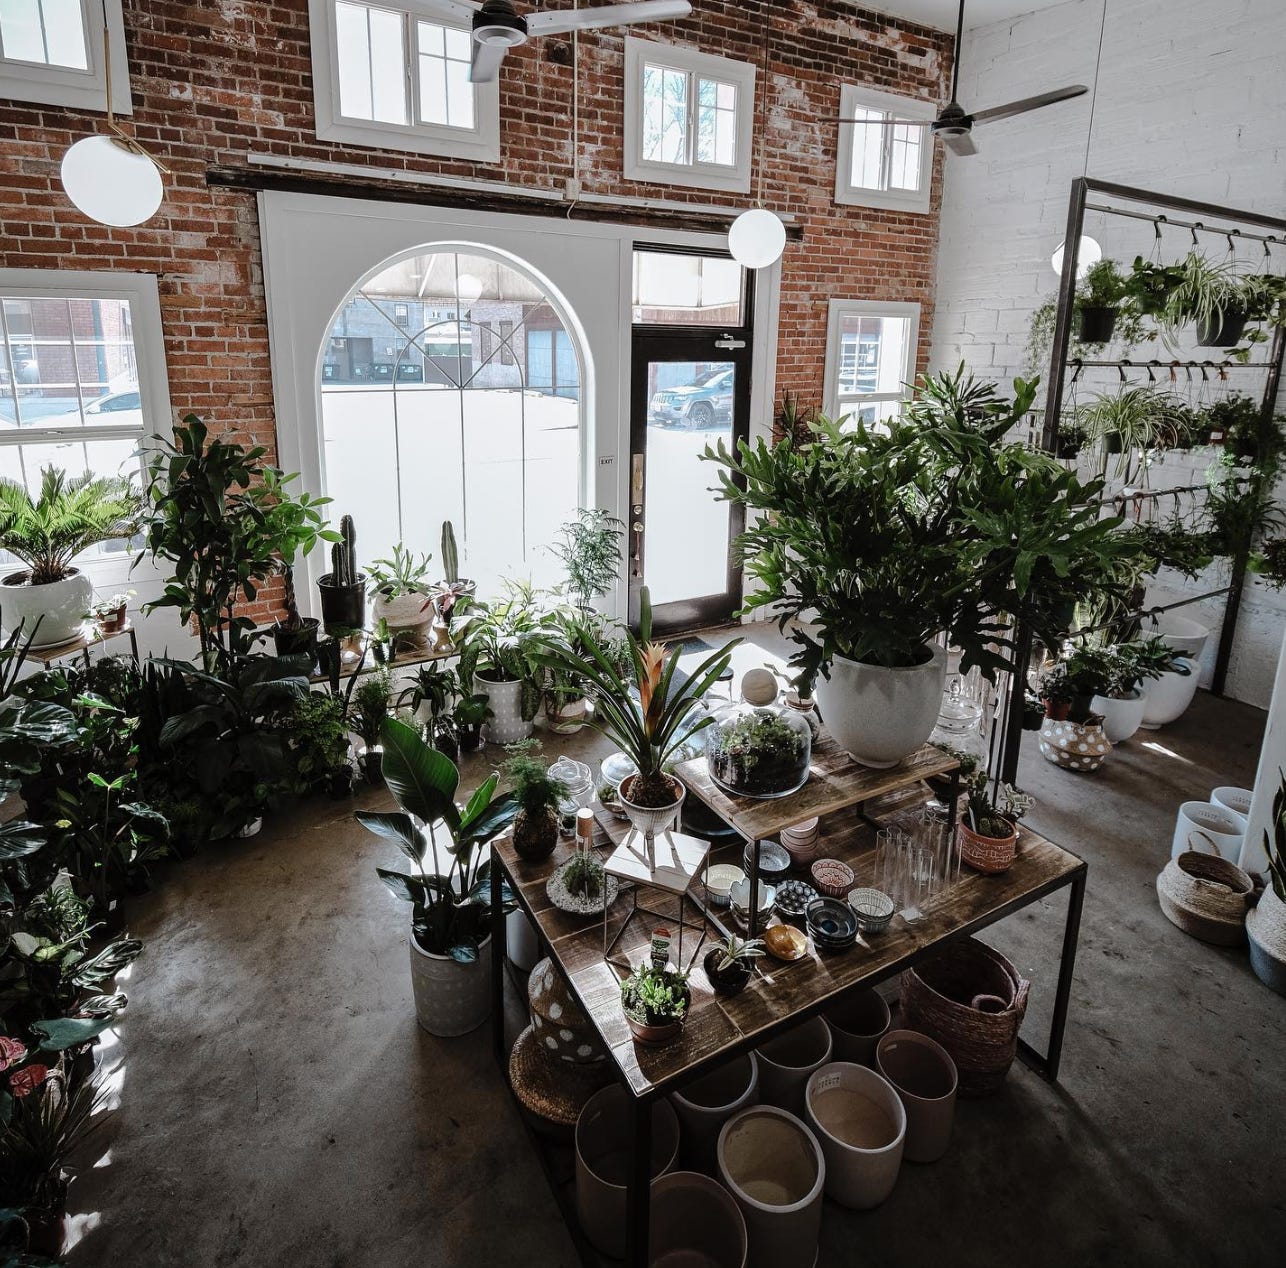 An interior photo of the entry to a plant shop looking out towards a brick wall with white windows that overlook the street. Lots of green plants in pots are hanging from rails, in pots on tables and linking the floor. Some cactus are silhouetted in front of an arched picture window to the left of the front door which stands out in a black frame.